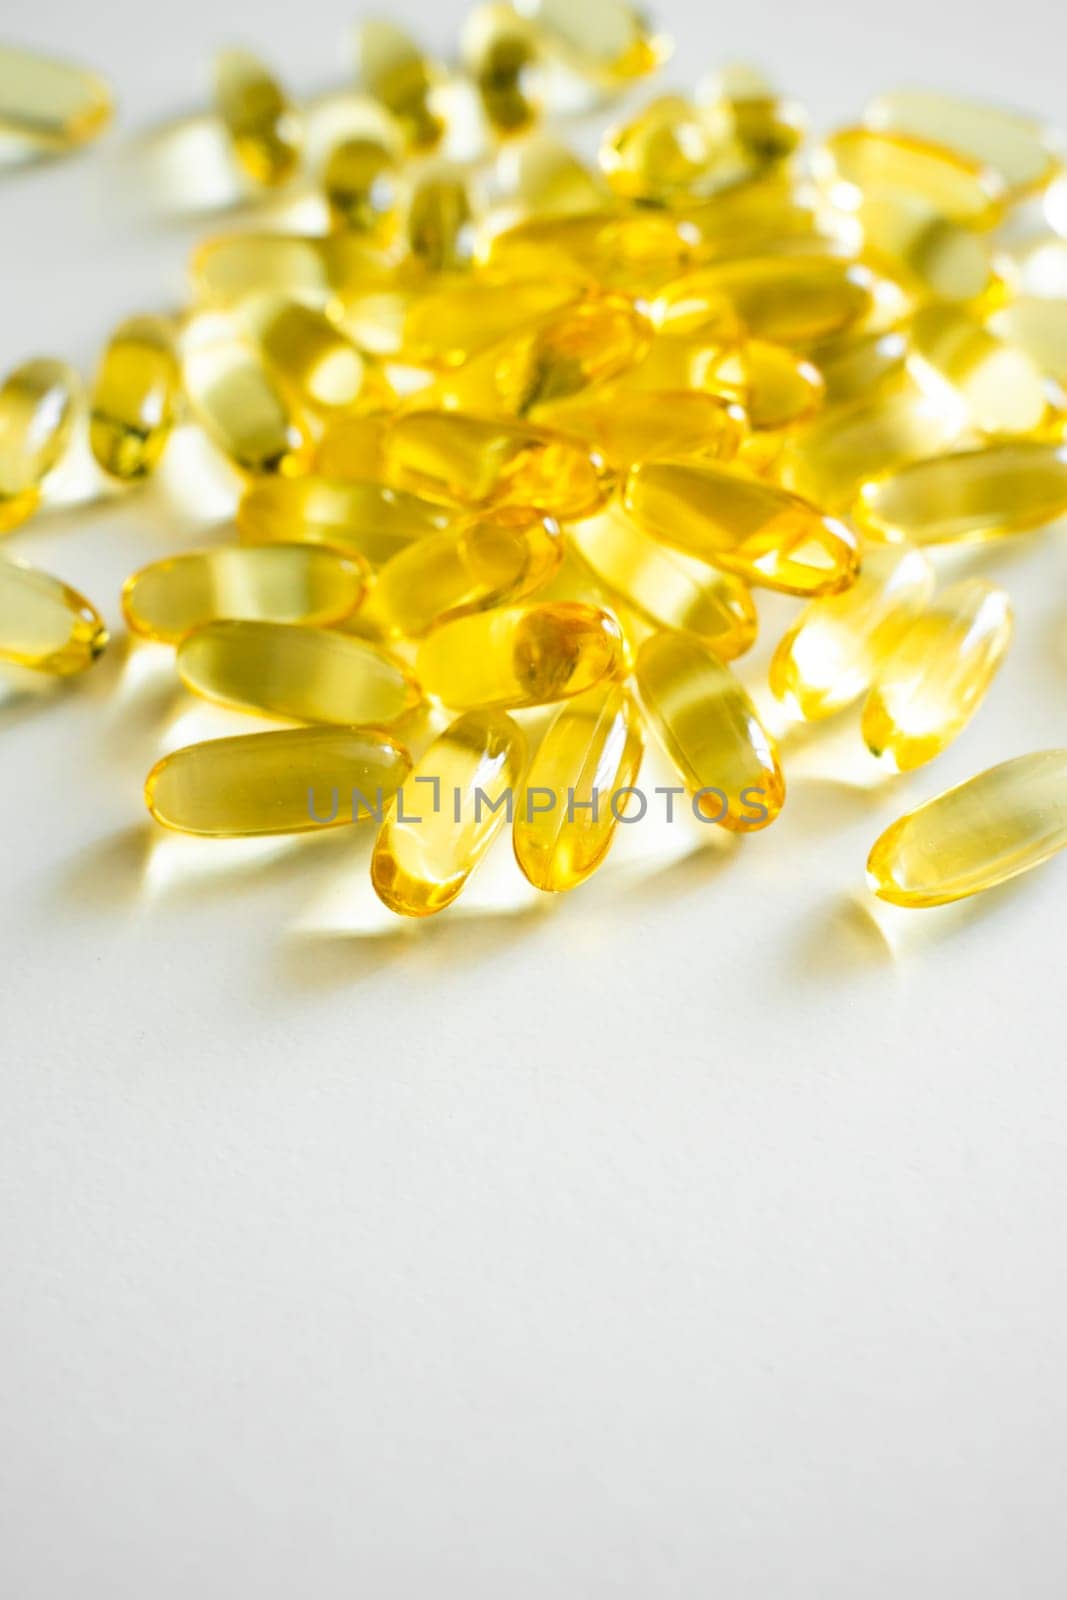 Close up cod liver oil omega 3 gel capsules. Fish oil capsules with omega 3 on white background. by vovsht